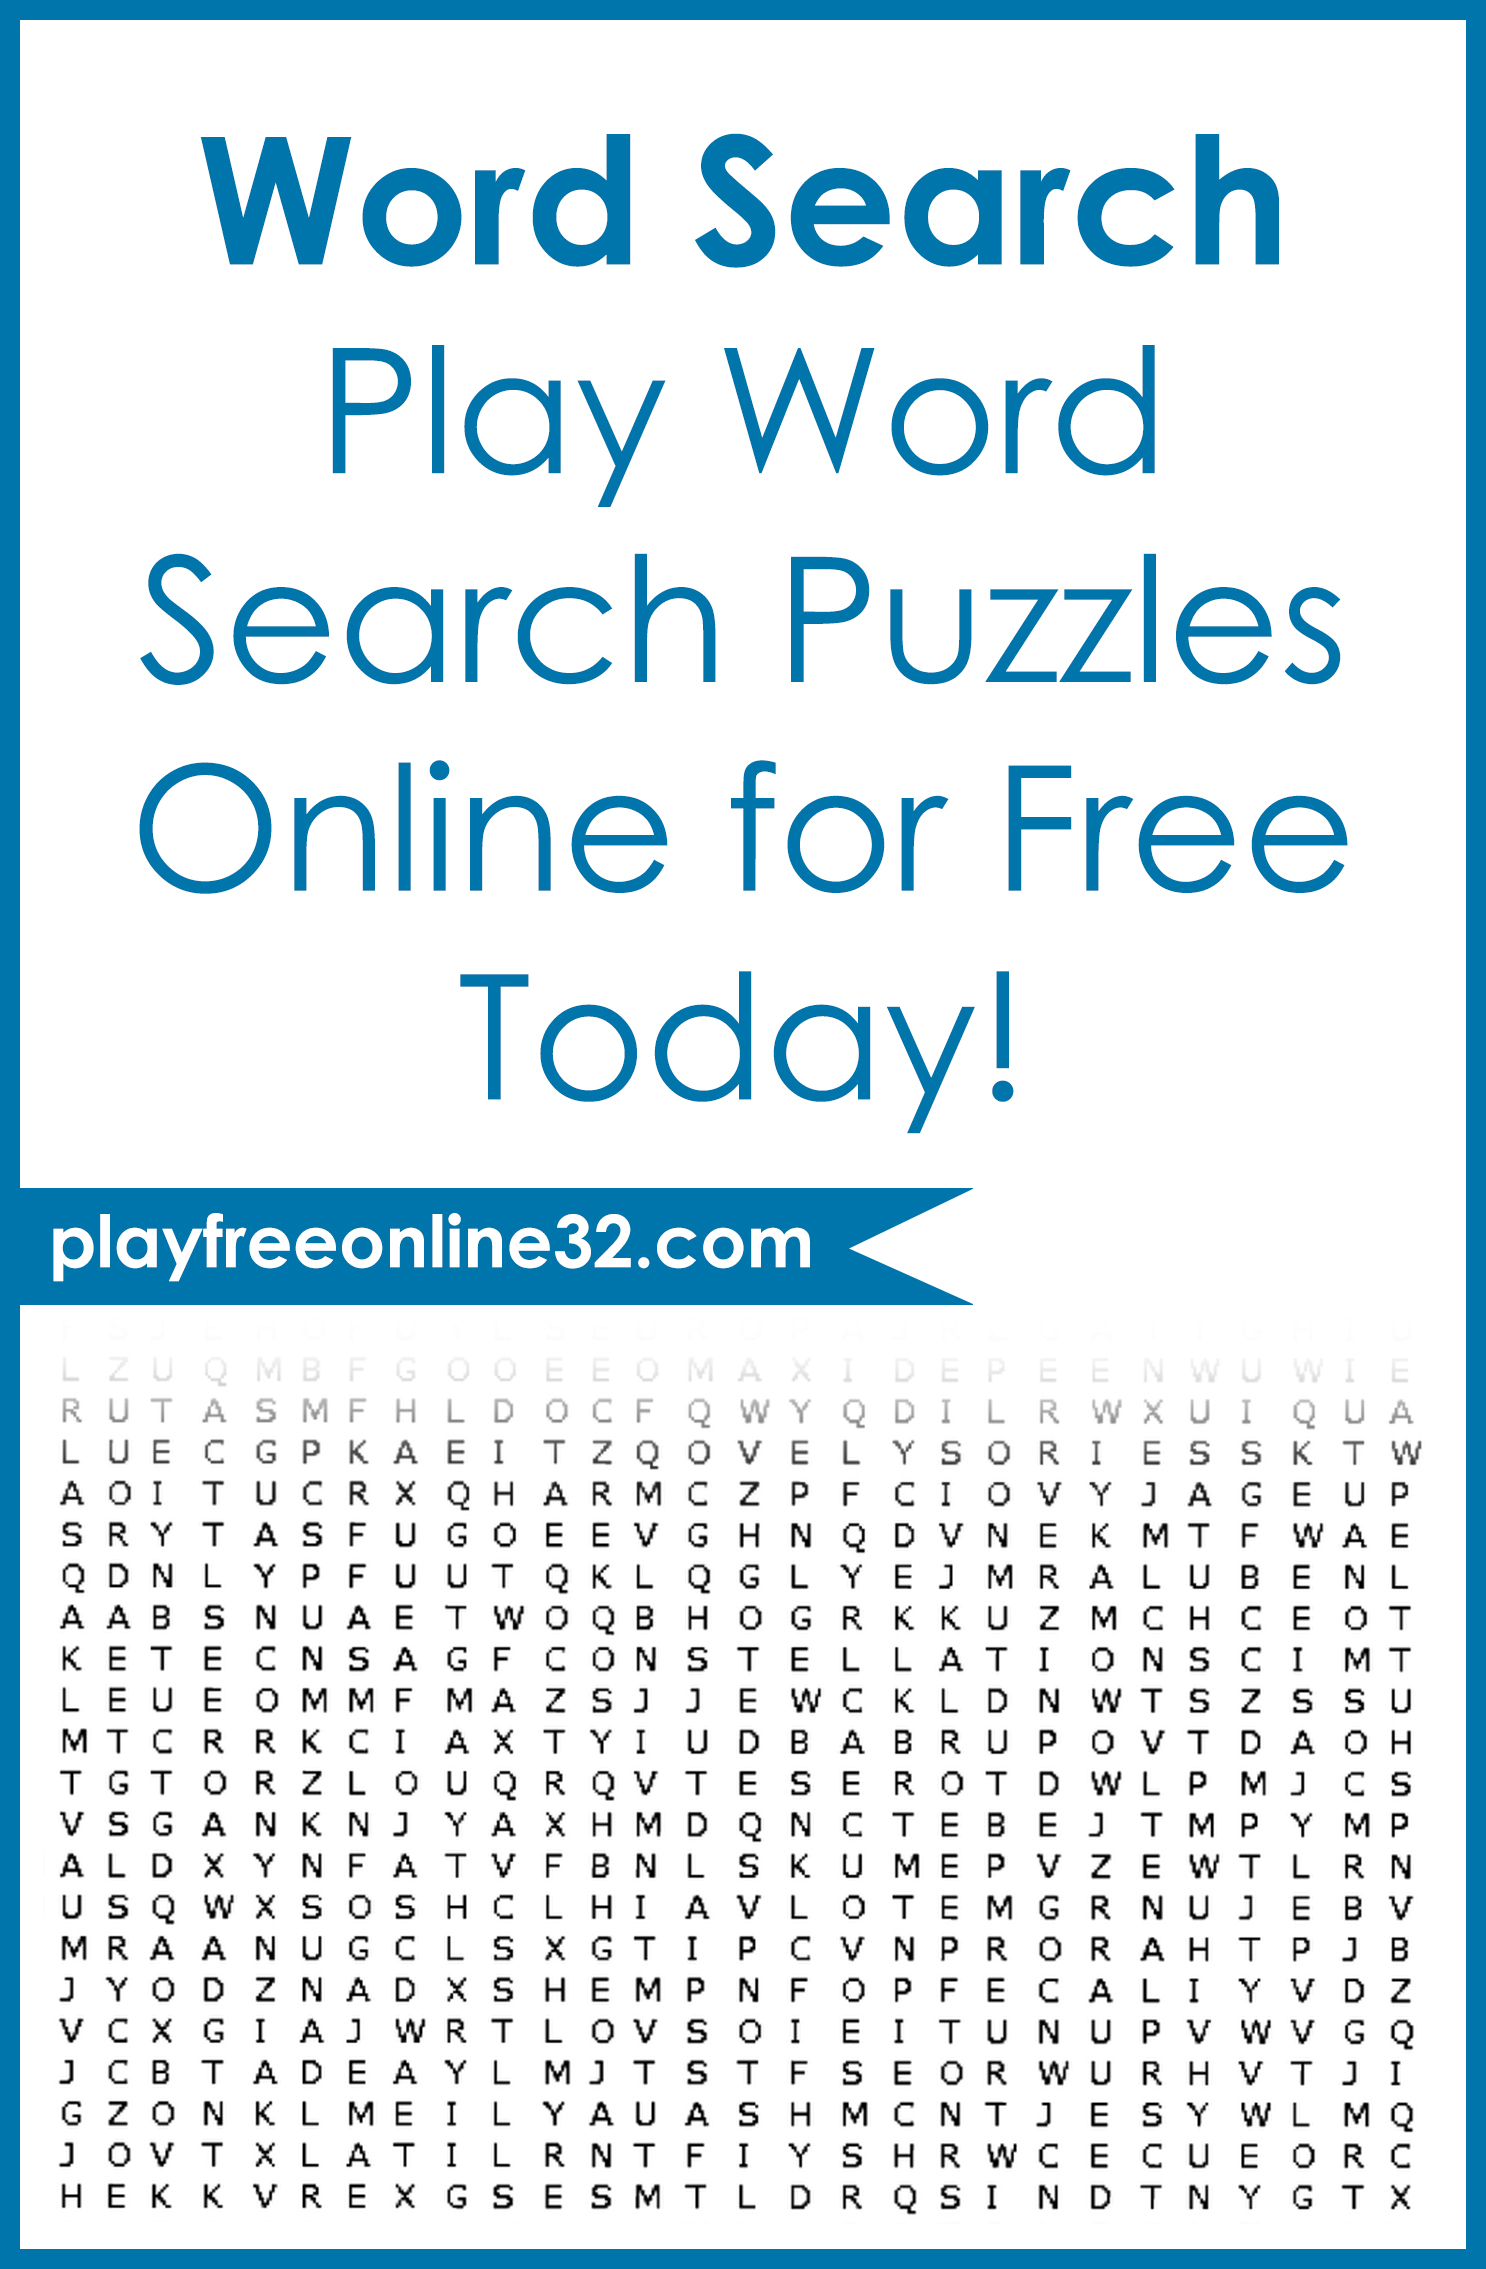 Word Search • Play Word Search Puzzles Online for Free Today!